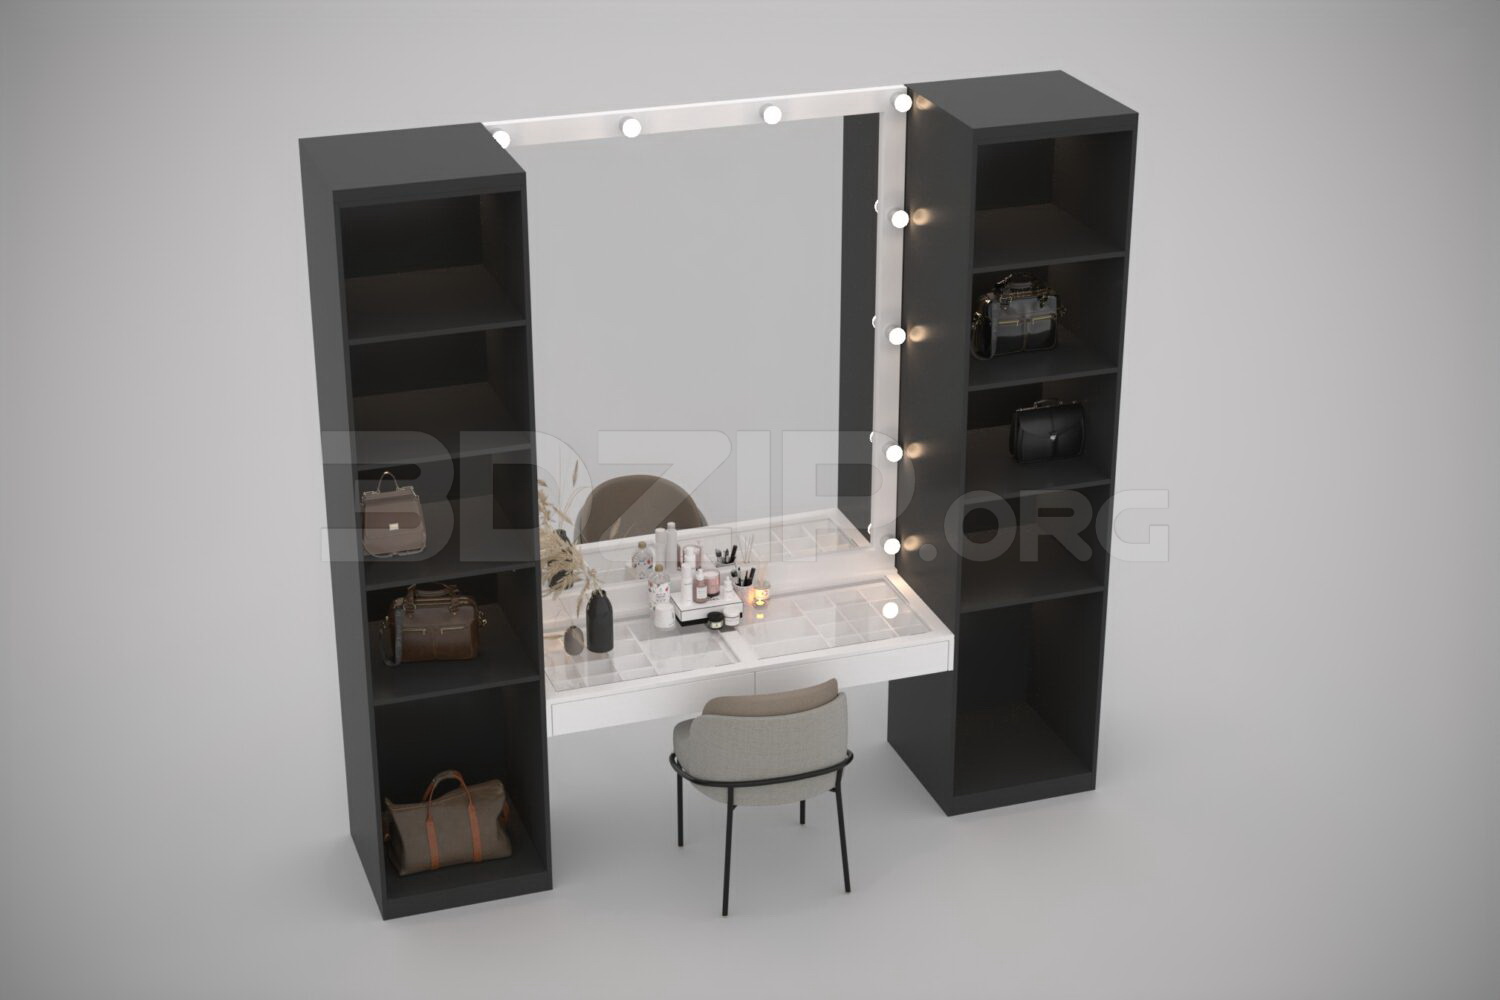 2221. Download Free Dressing Table Model By Phuong Tran